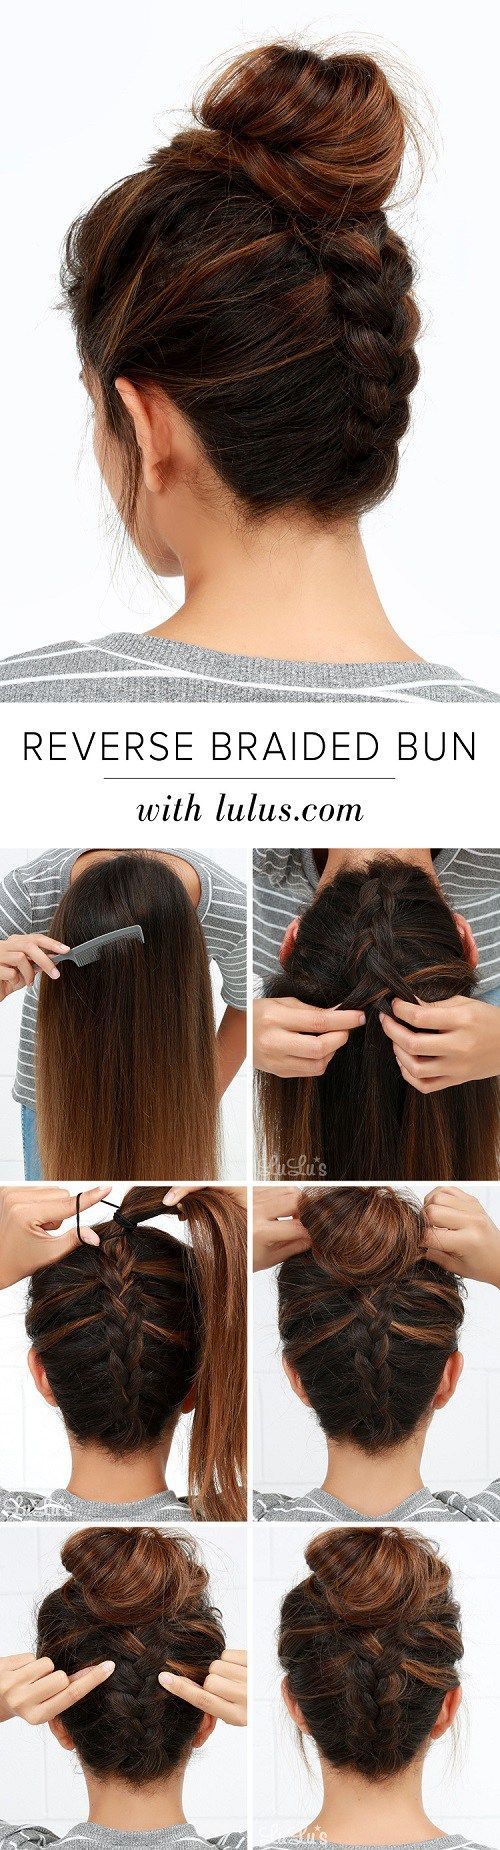 Upside Down Braid And Bun Tutorial. Hair ideas. A tutorial you can try on yourse...